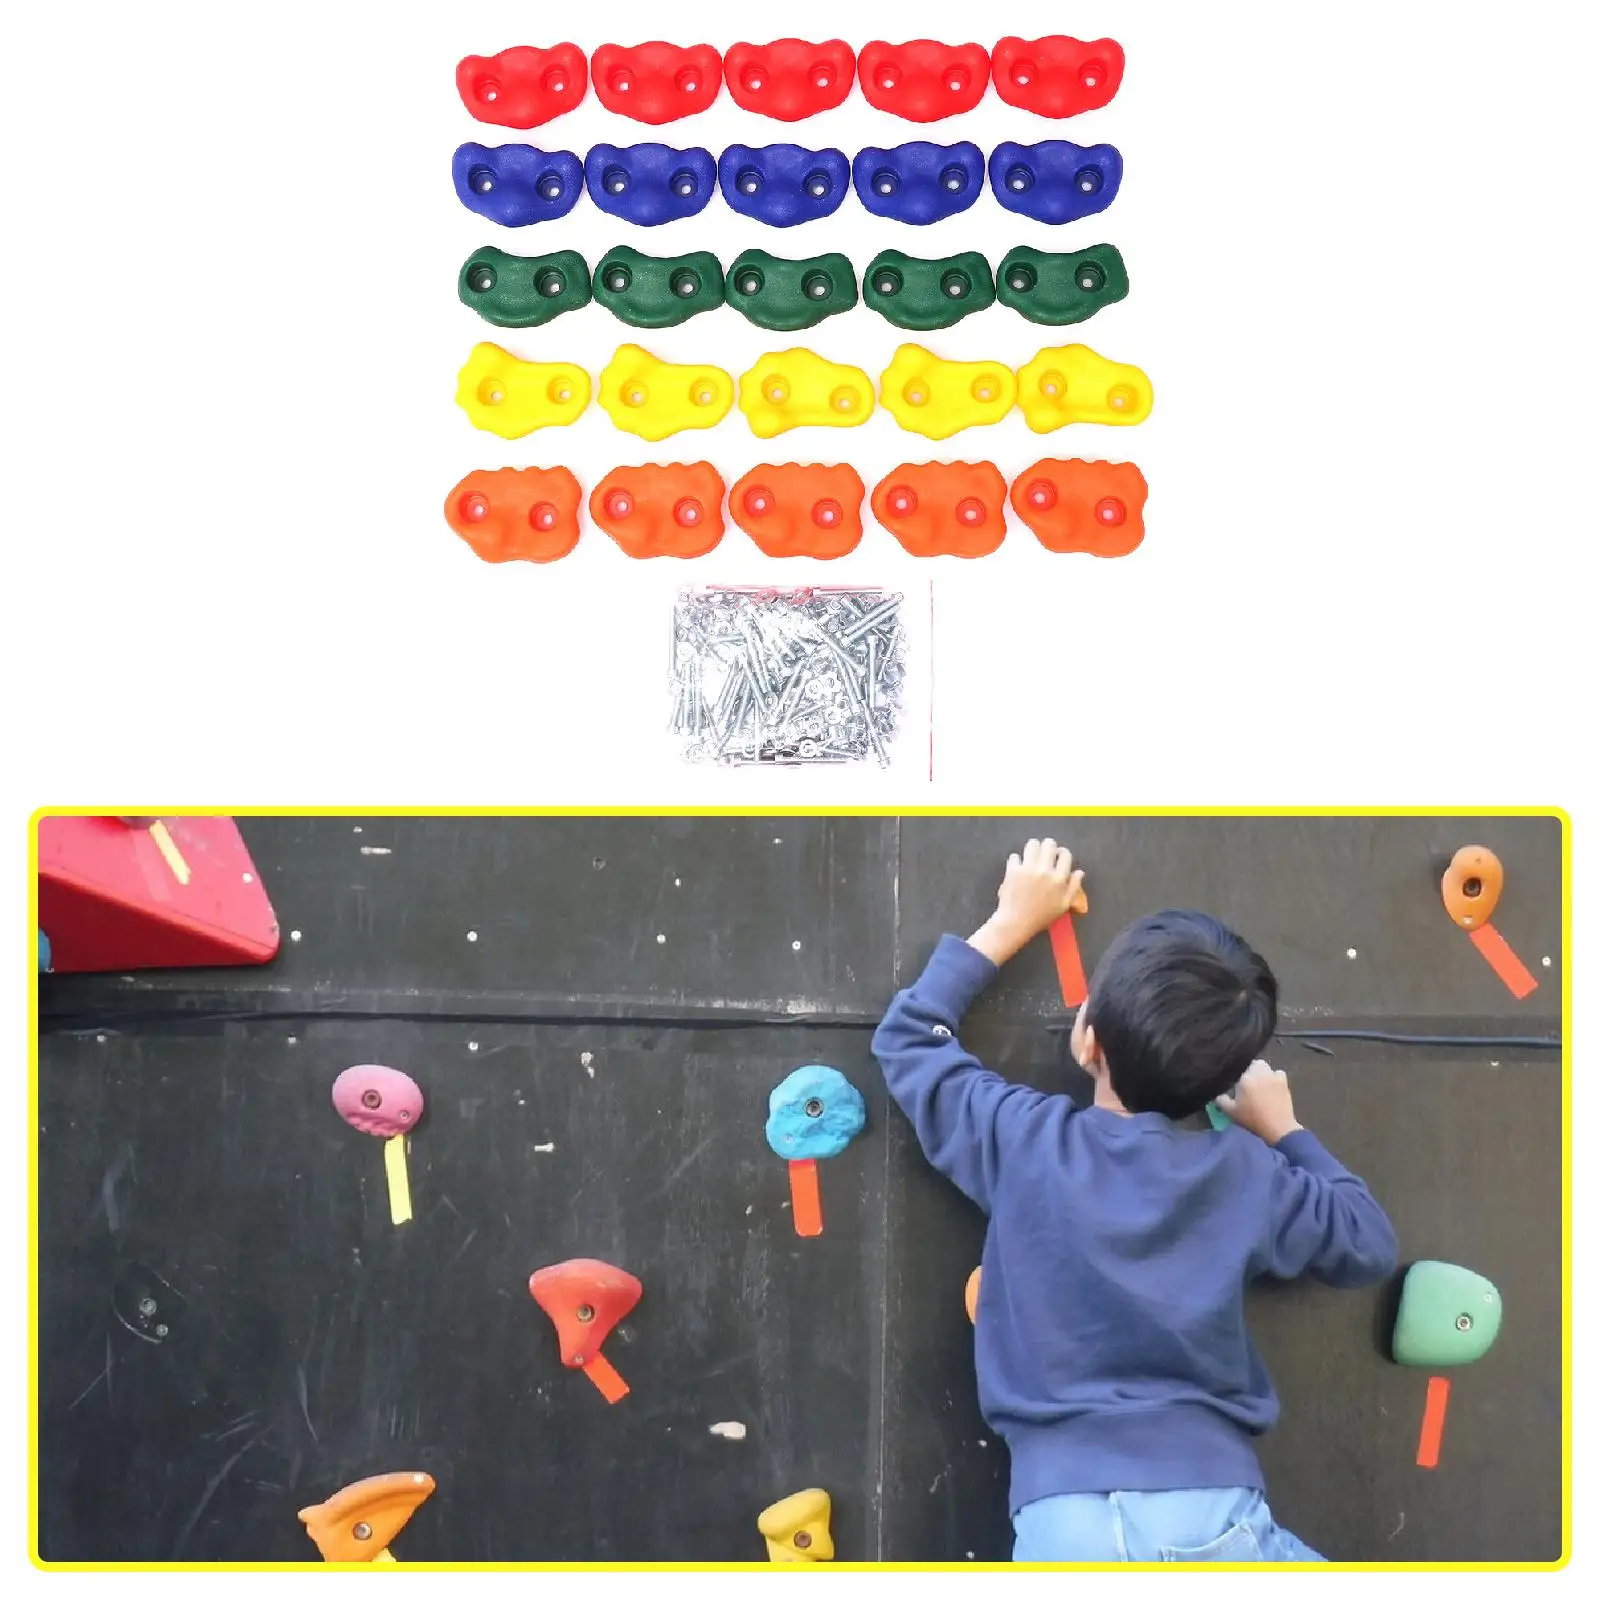 Tree Climbing Holds for Kids Climber, Adult Climbing Rocks for Outdoor Obstacle Course Training with Mounting Hardware